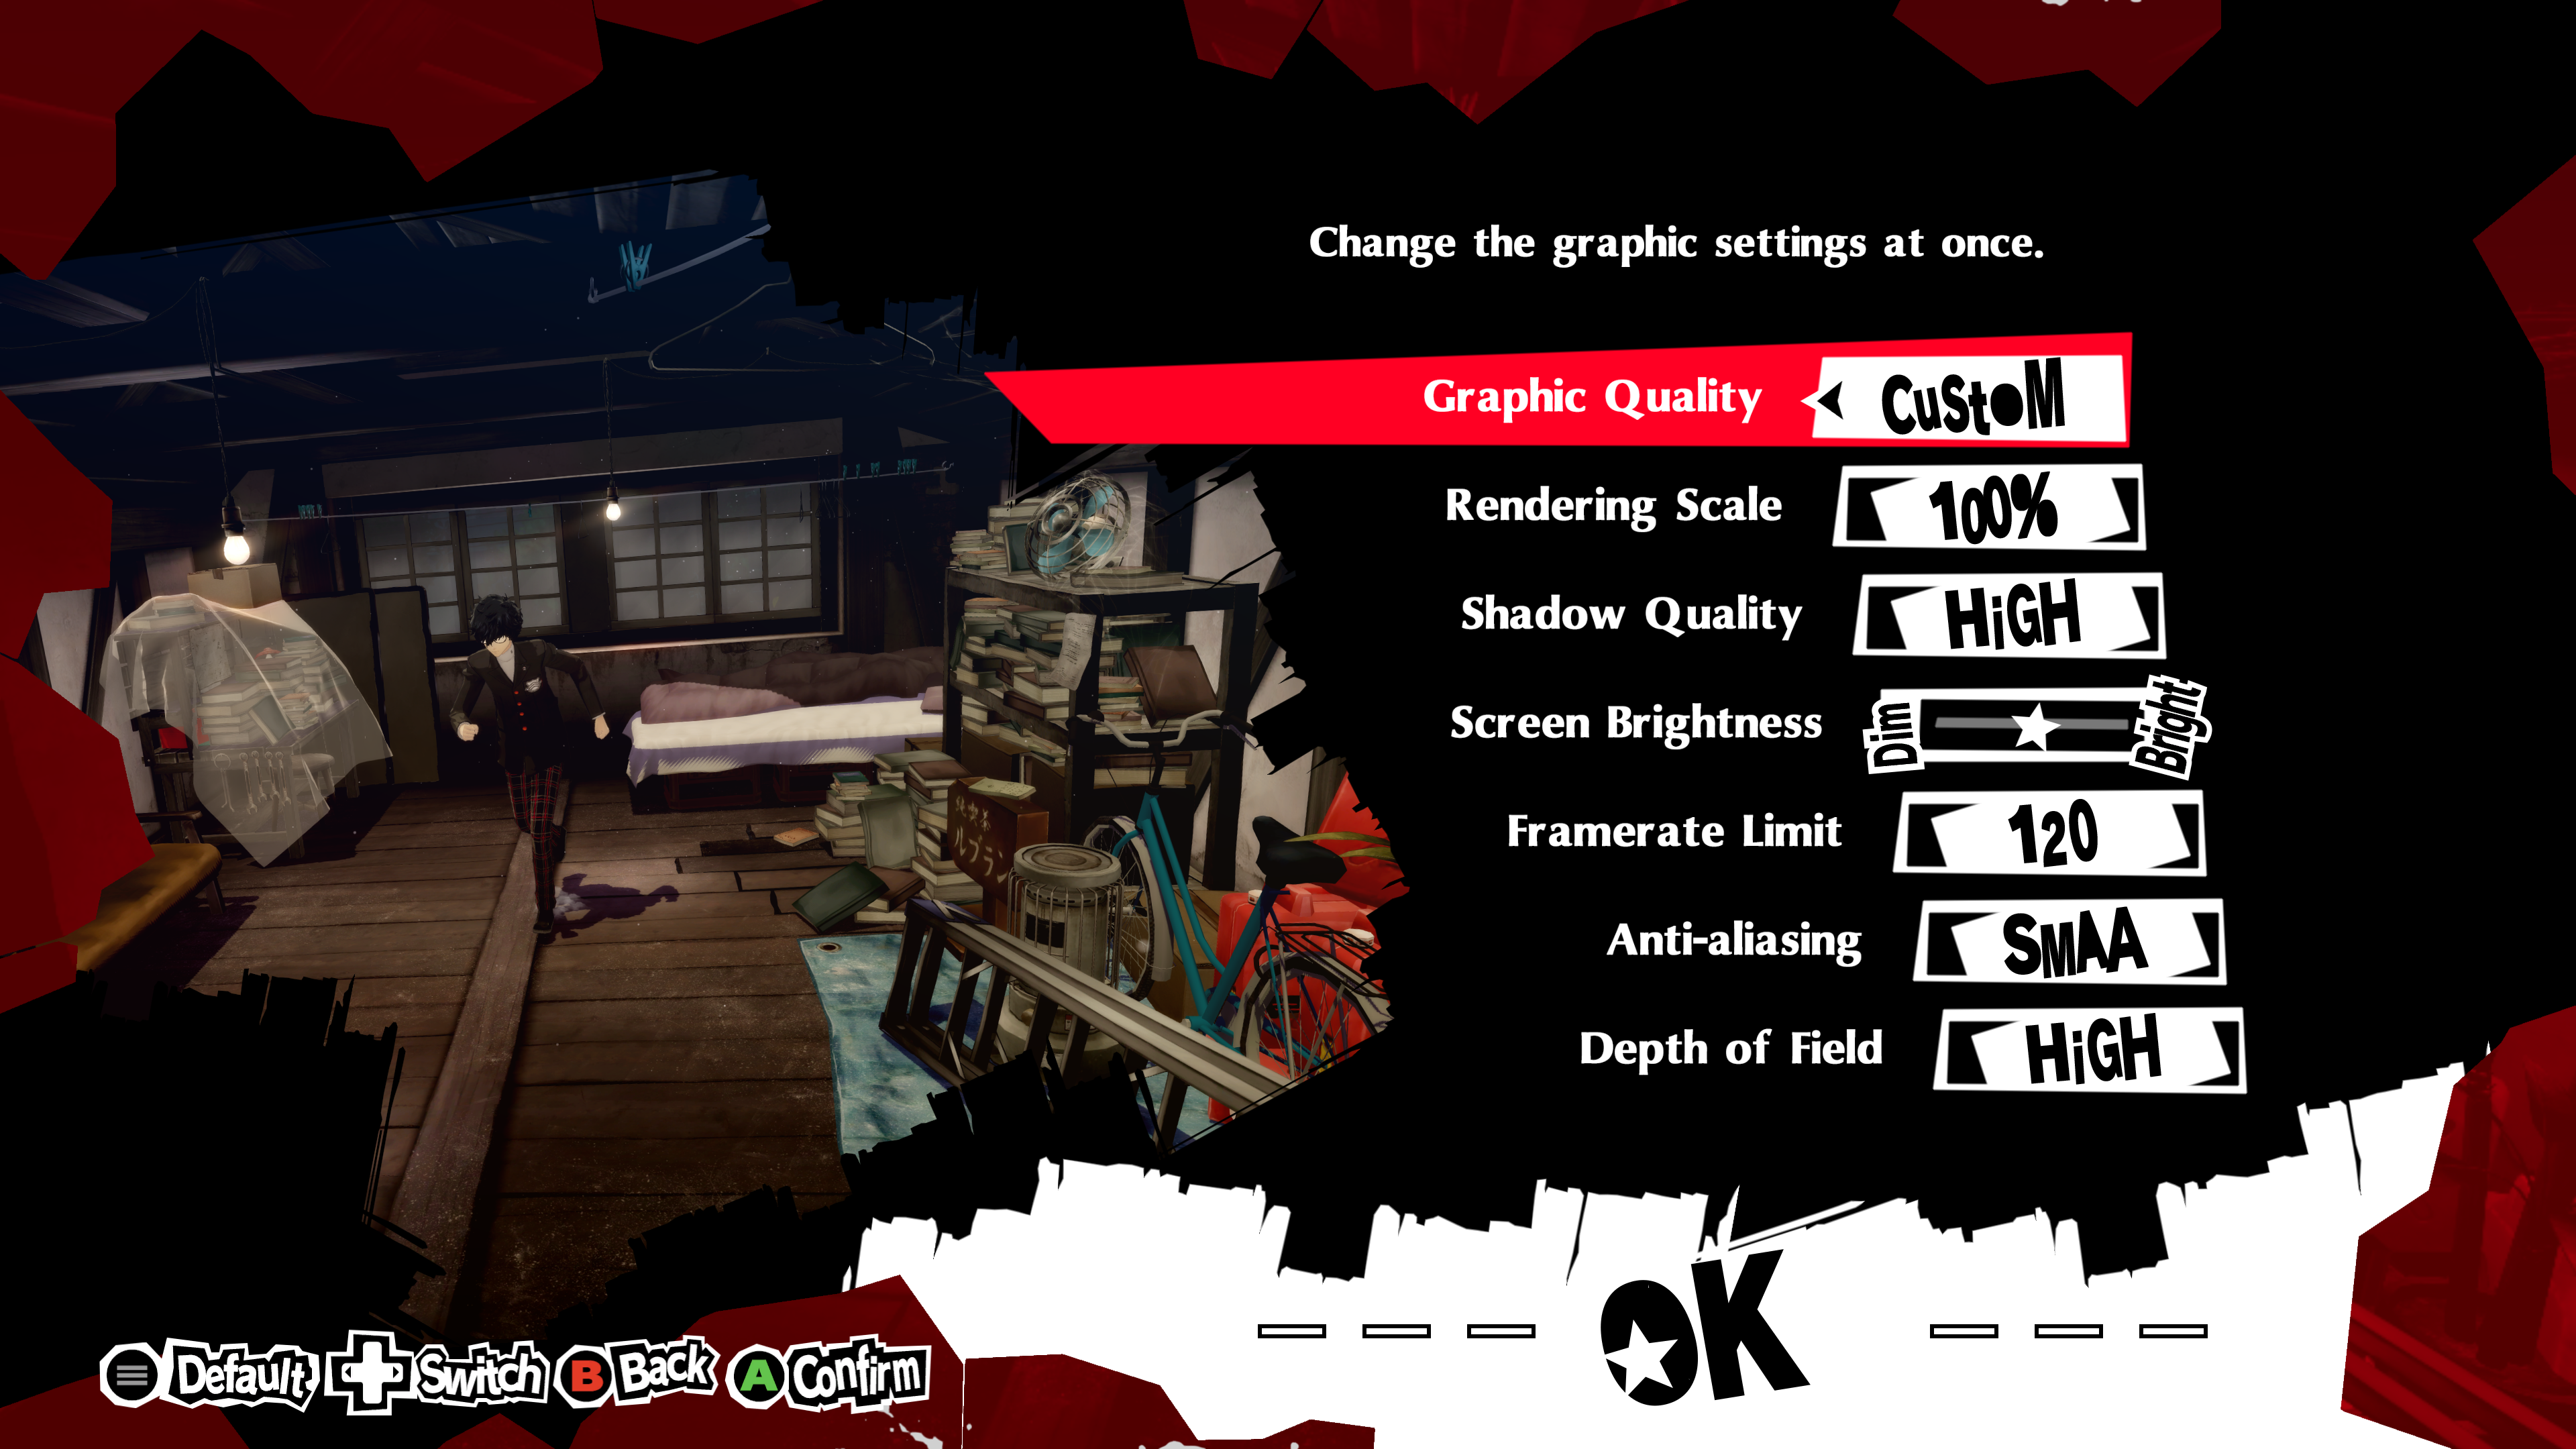 Persona 5 Royal now available for Windows, Xbox and with Game Pass